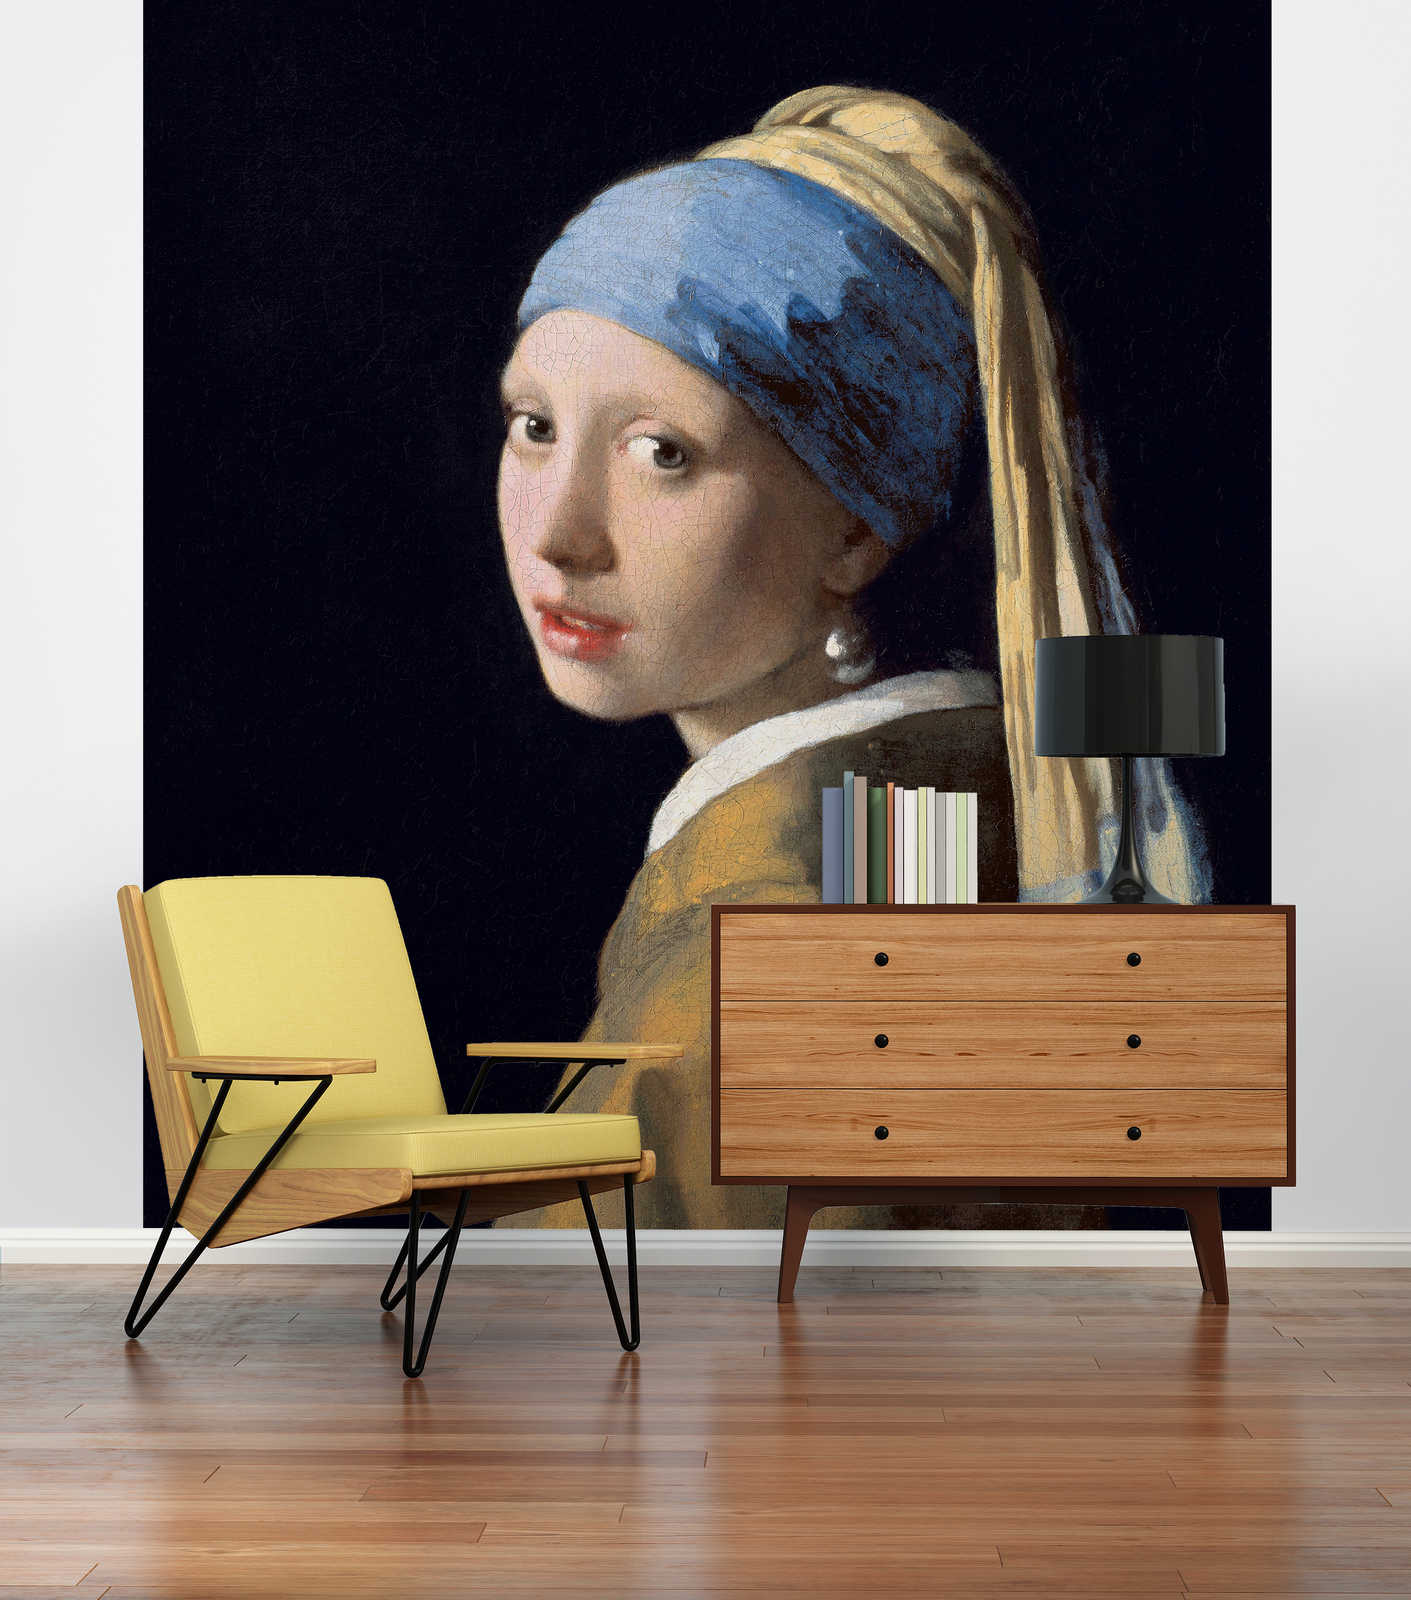             Photo wallpaper "The girl with the pearl earring" by Jan Vermeer
        